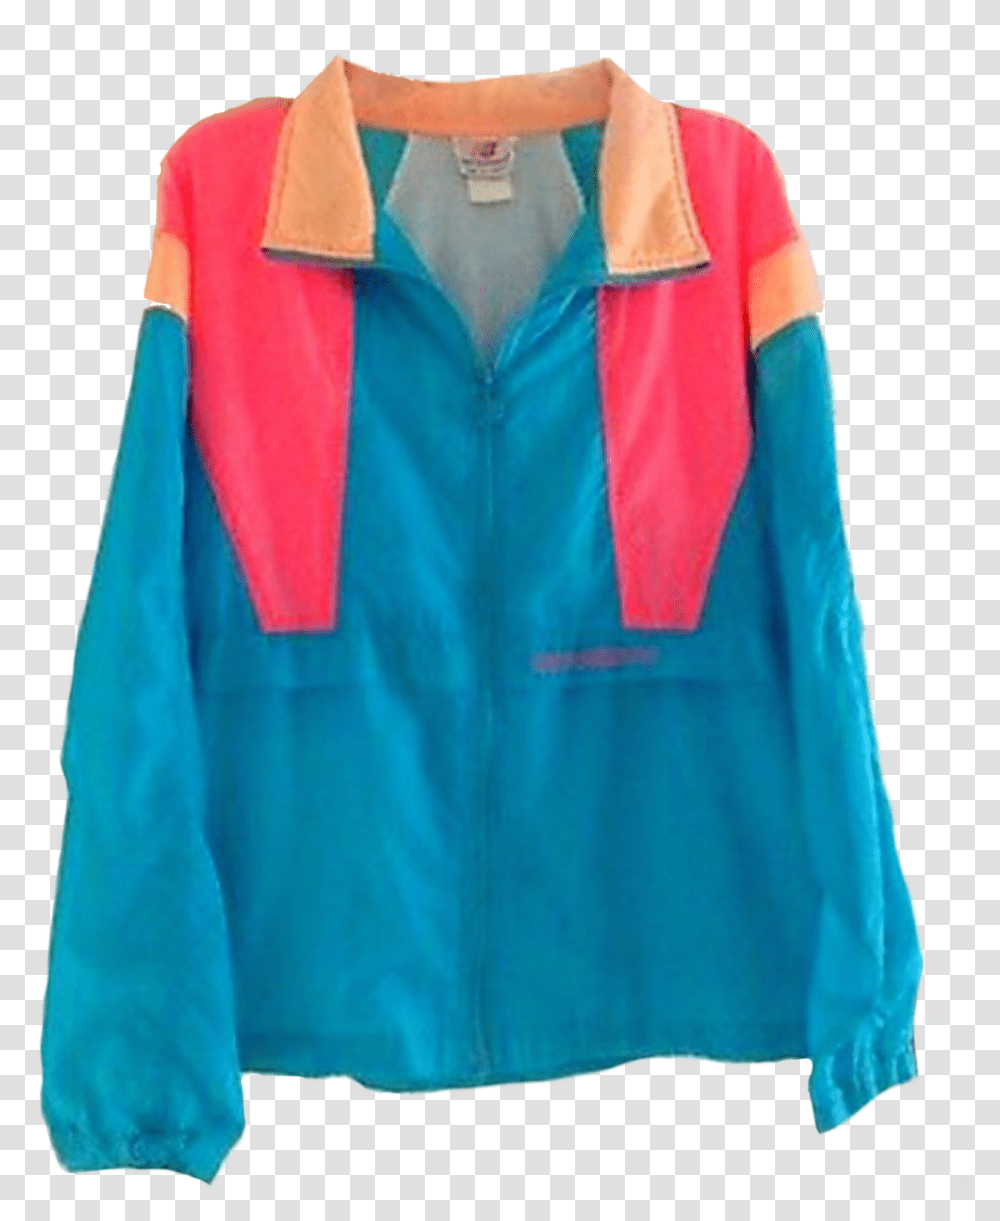 90s And Pngs Image Blouse, Apparel, Coat, Jacket Transparent Png